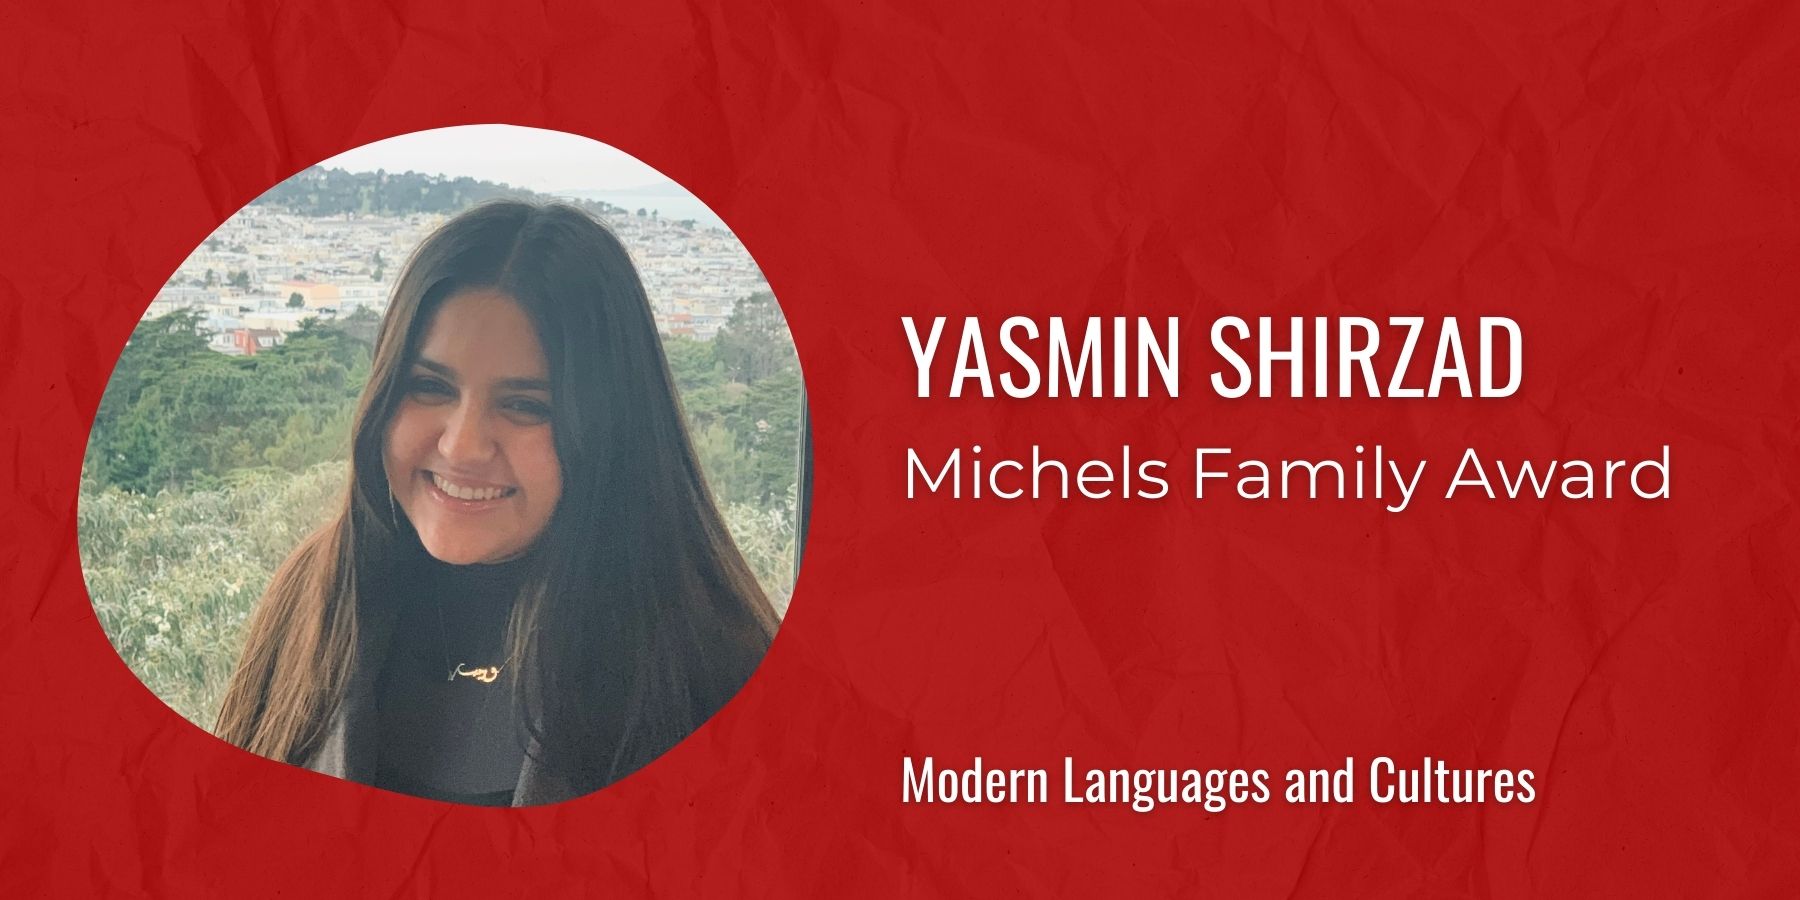 Image of Yasmin Shirzad with text: Michels Family Award, Modern Languages and Cultures
